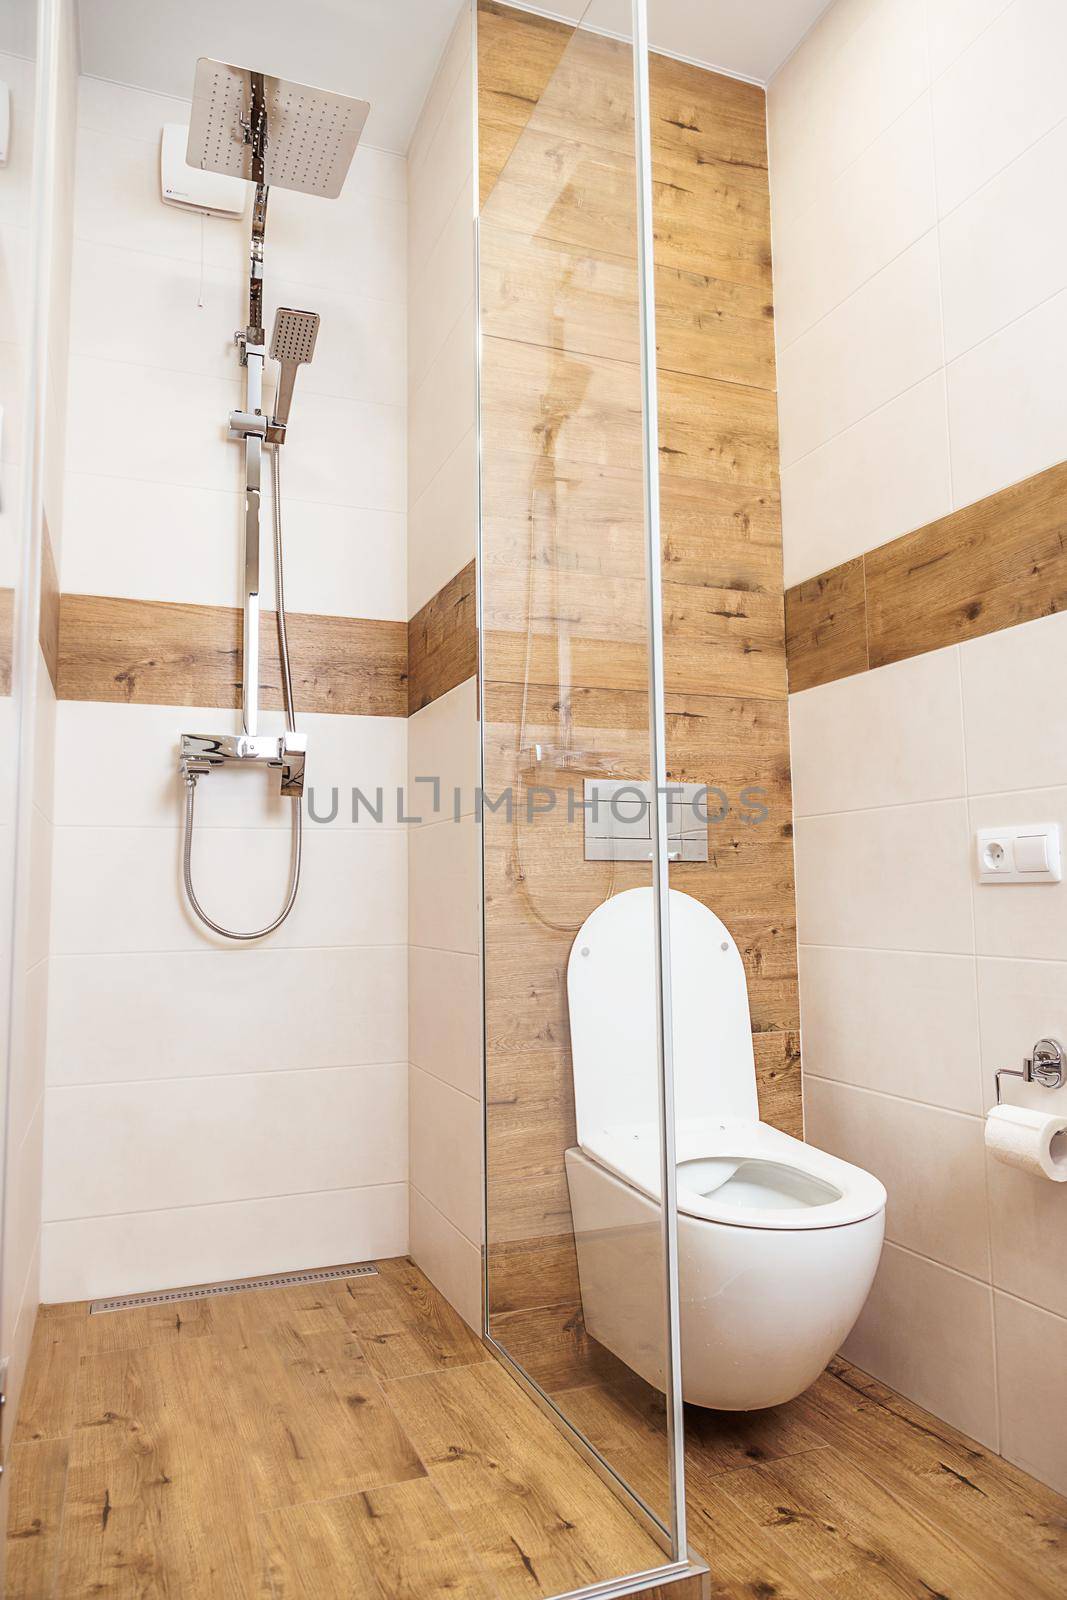 Minimalistic modern bathroom interior, close-up. Glass shower cubicle, chrome accessories and shower, and white, clean toilet. White and wooden ceramic tiles on the walls and on the floor